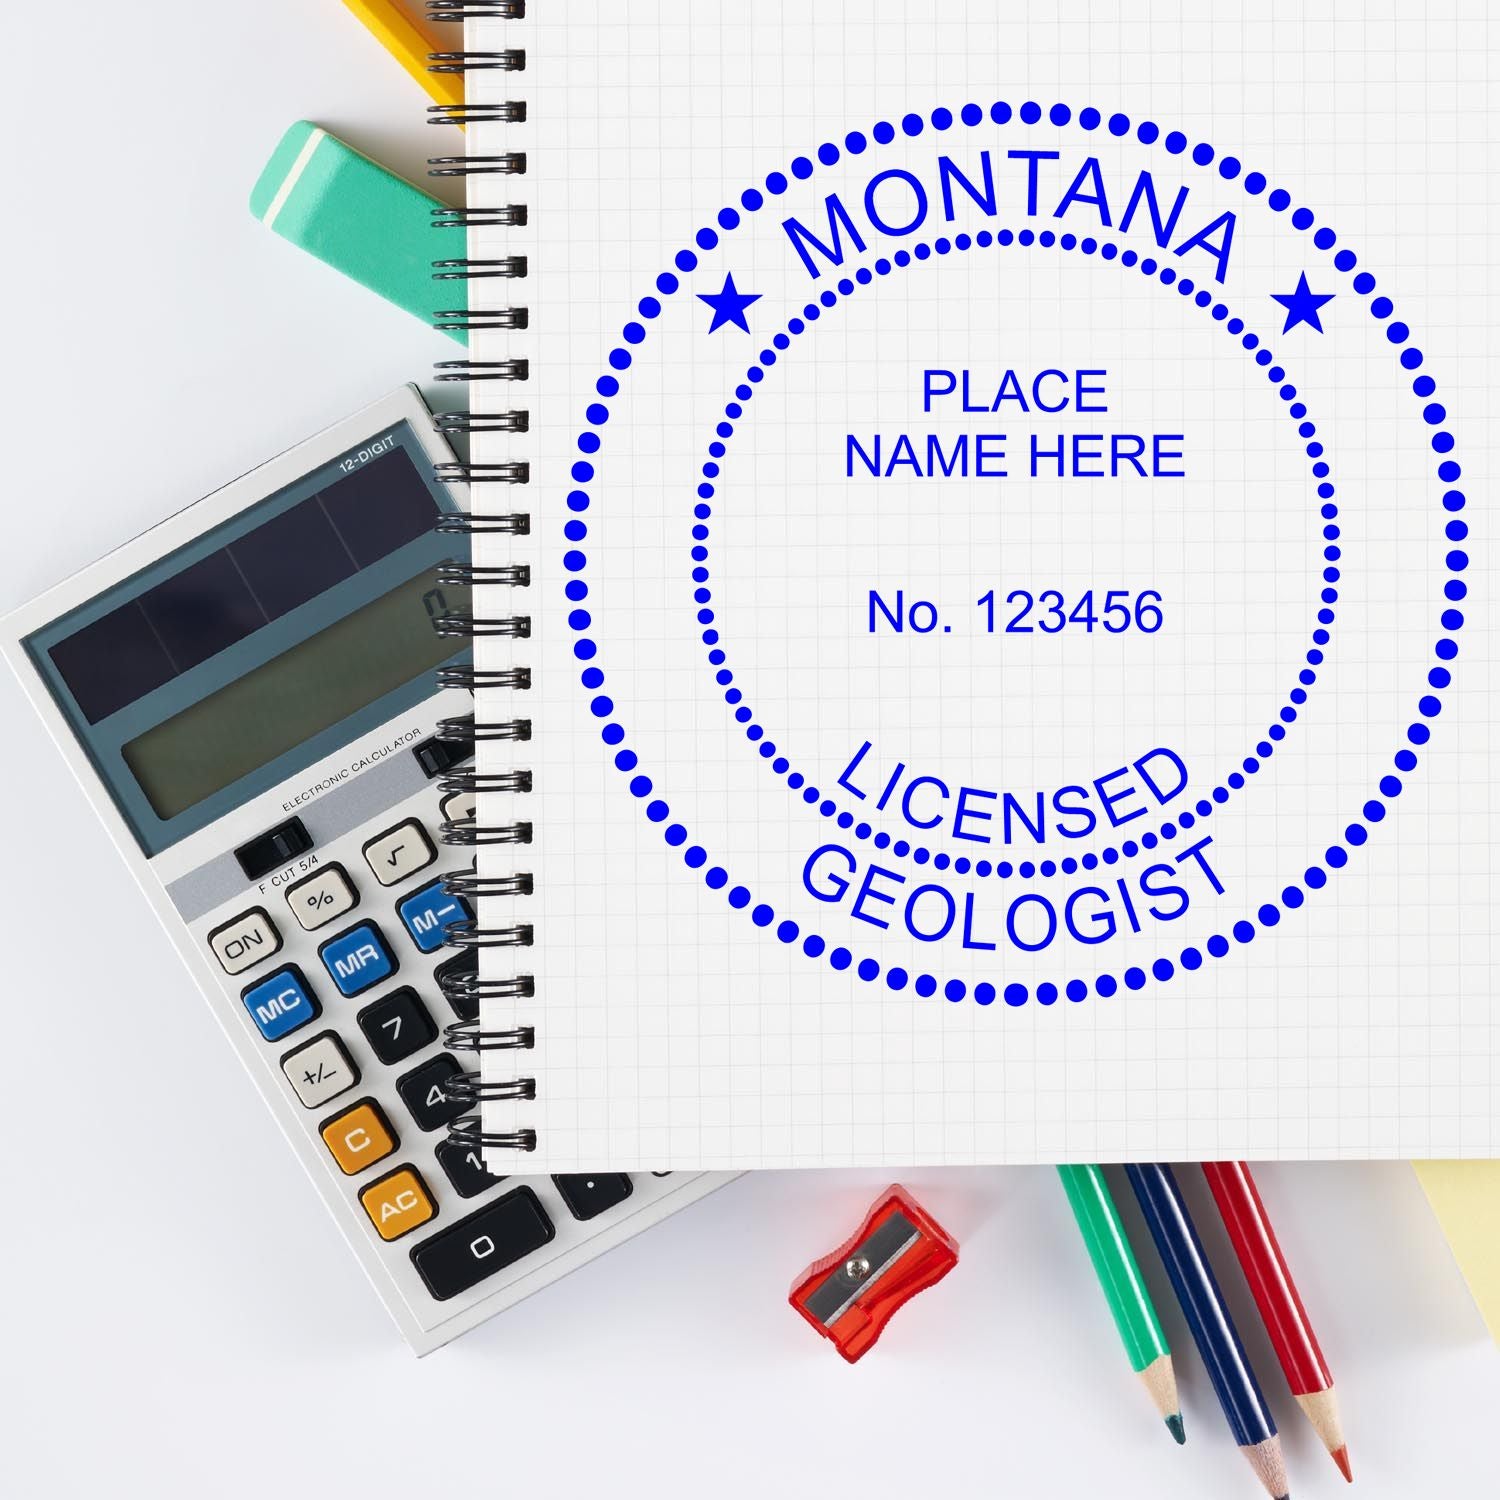 The main image for the Digital Montana Geologist Stamp, Electronic Seal for Montana Geologist depicting a sample of the imprint and imprint sample